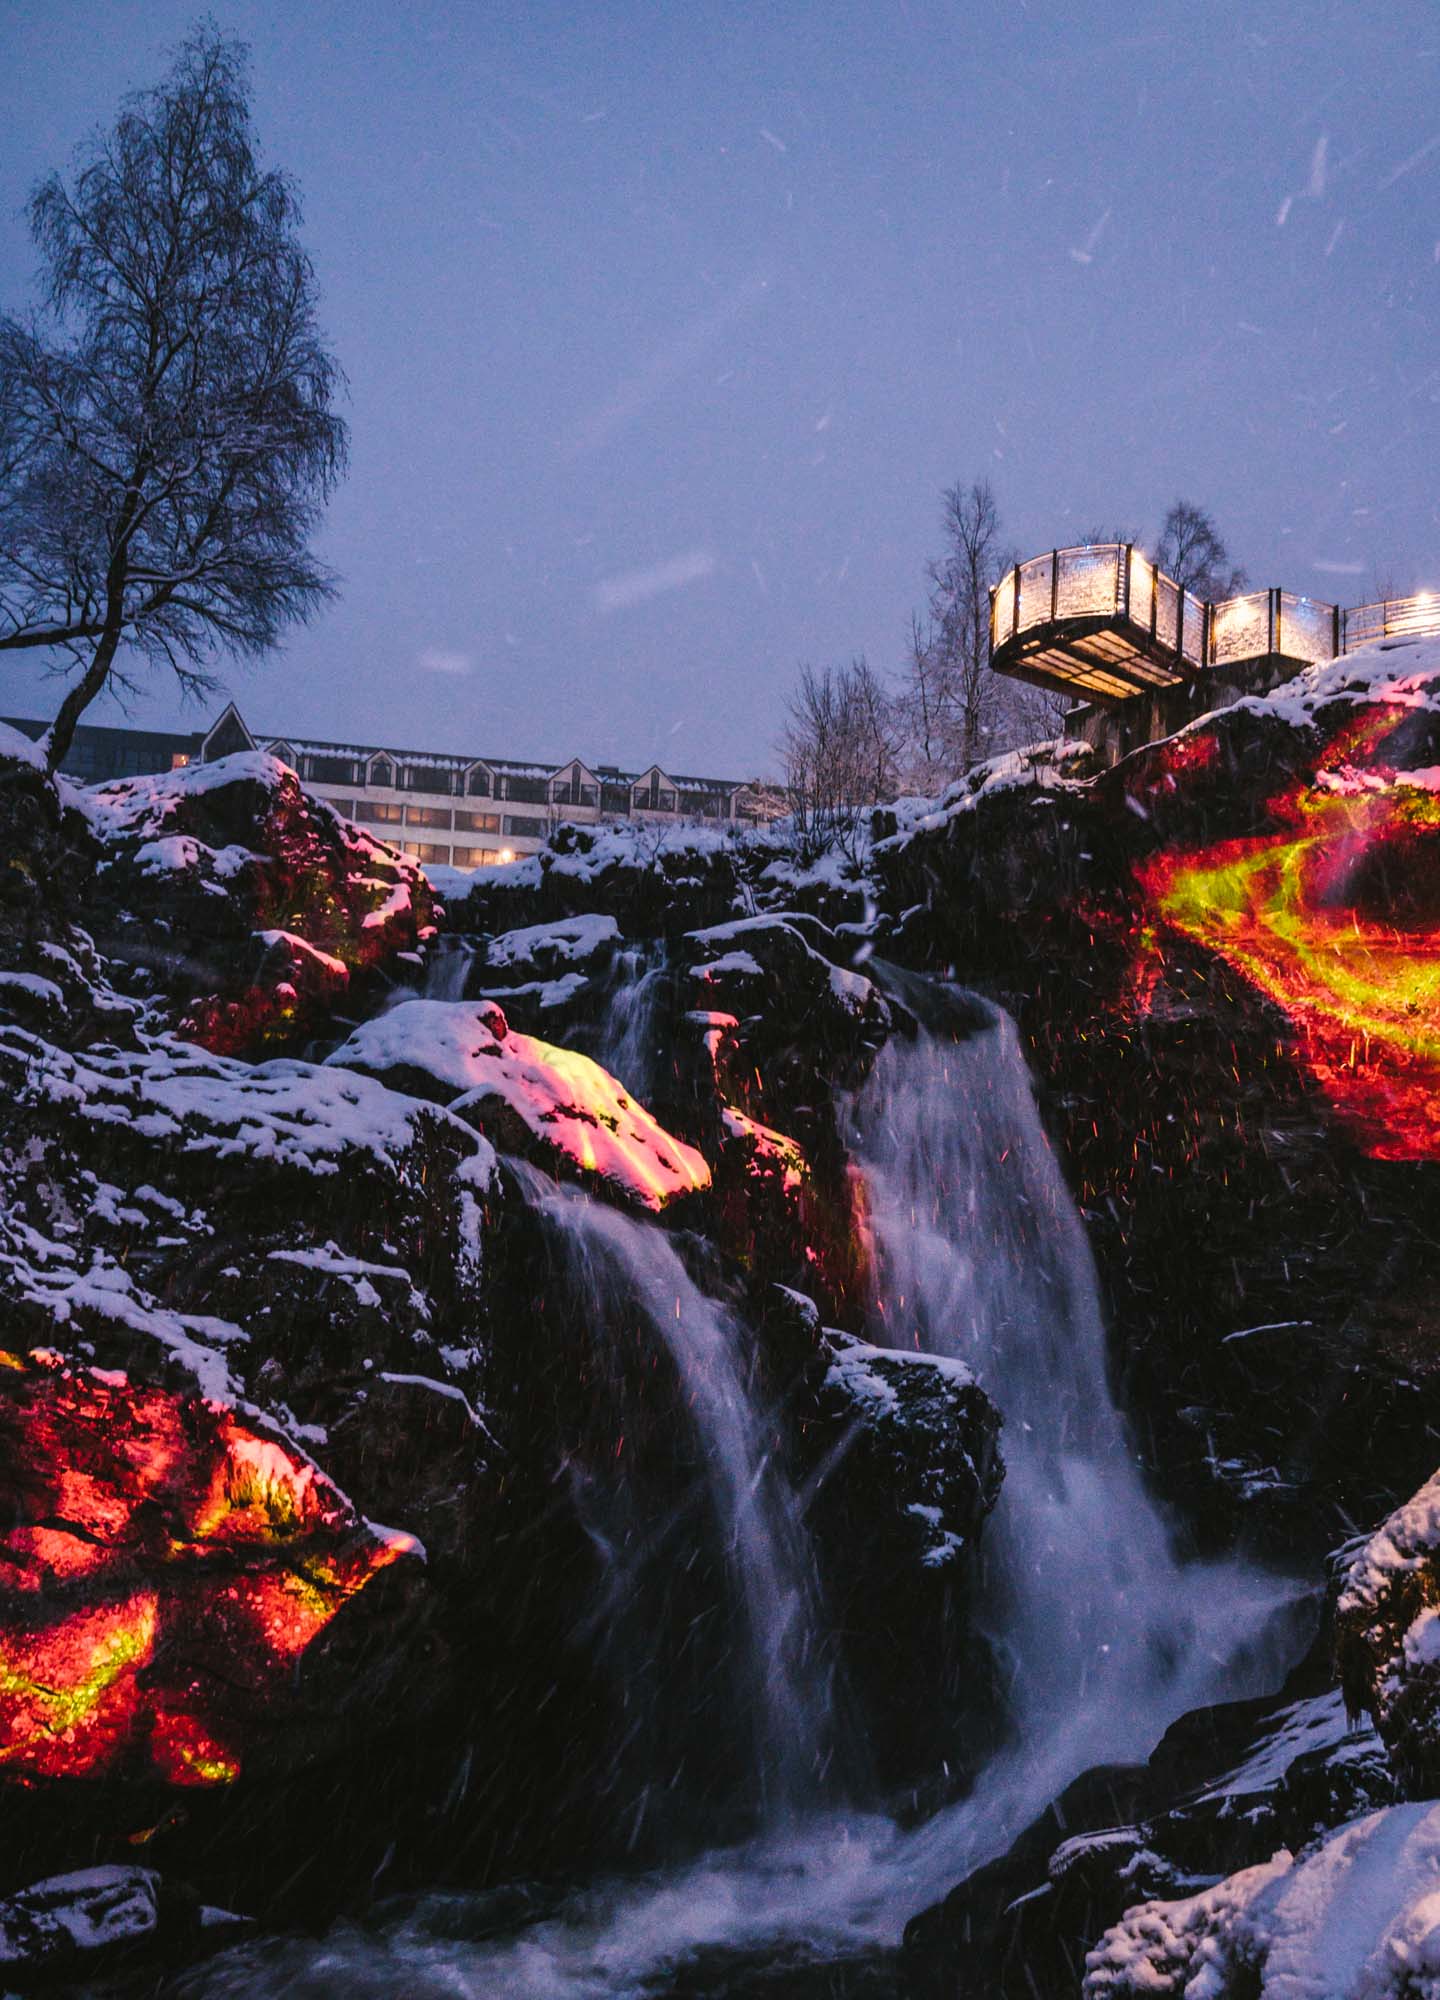 Video art projection with fire visuals on a waterfall and rocks